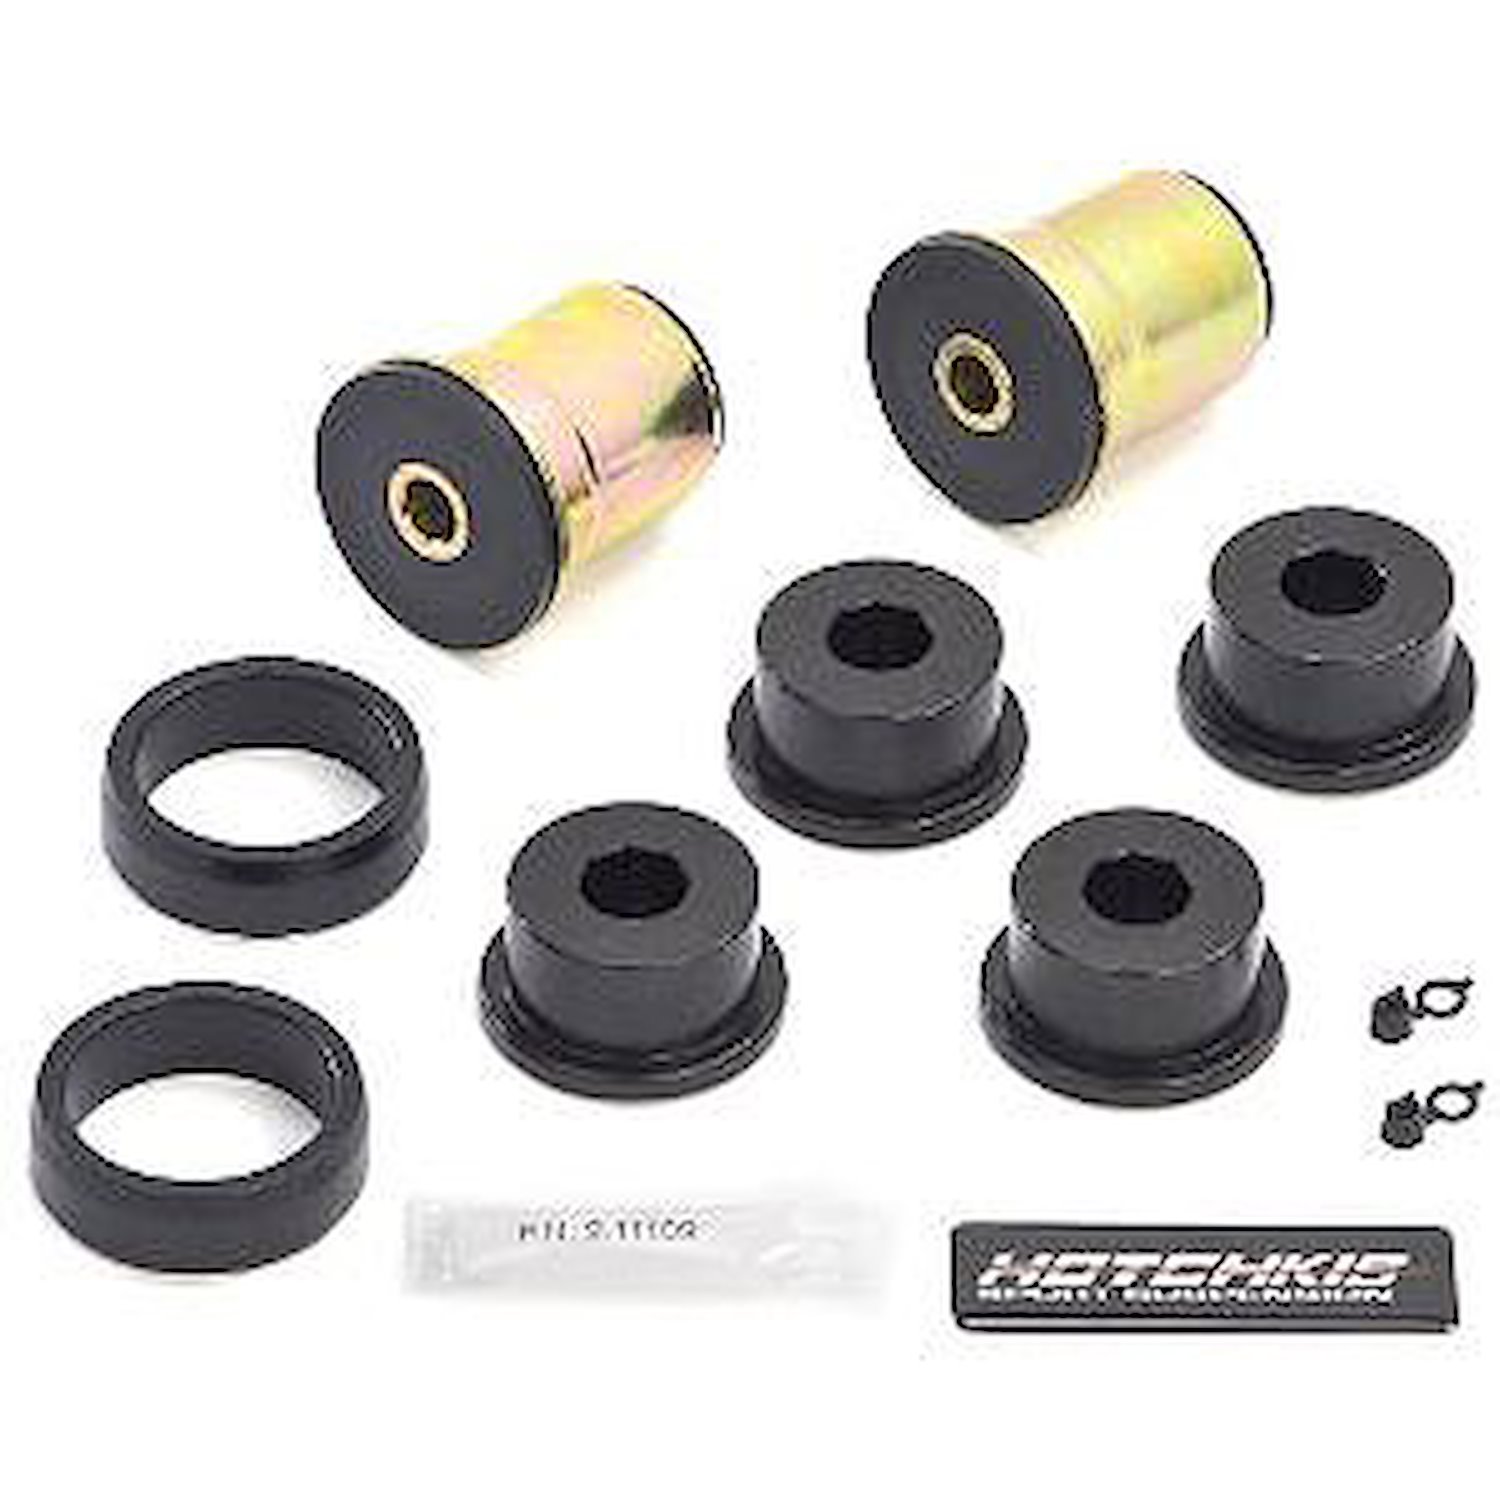 Trailing Arm Bushing Kit For Use With 515-1202, 1202A